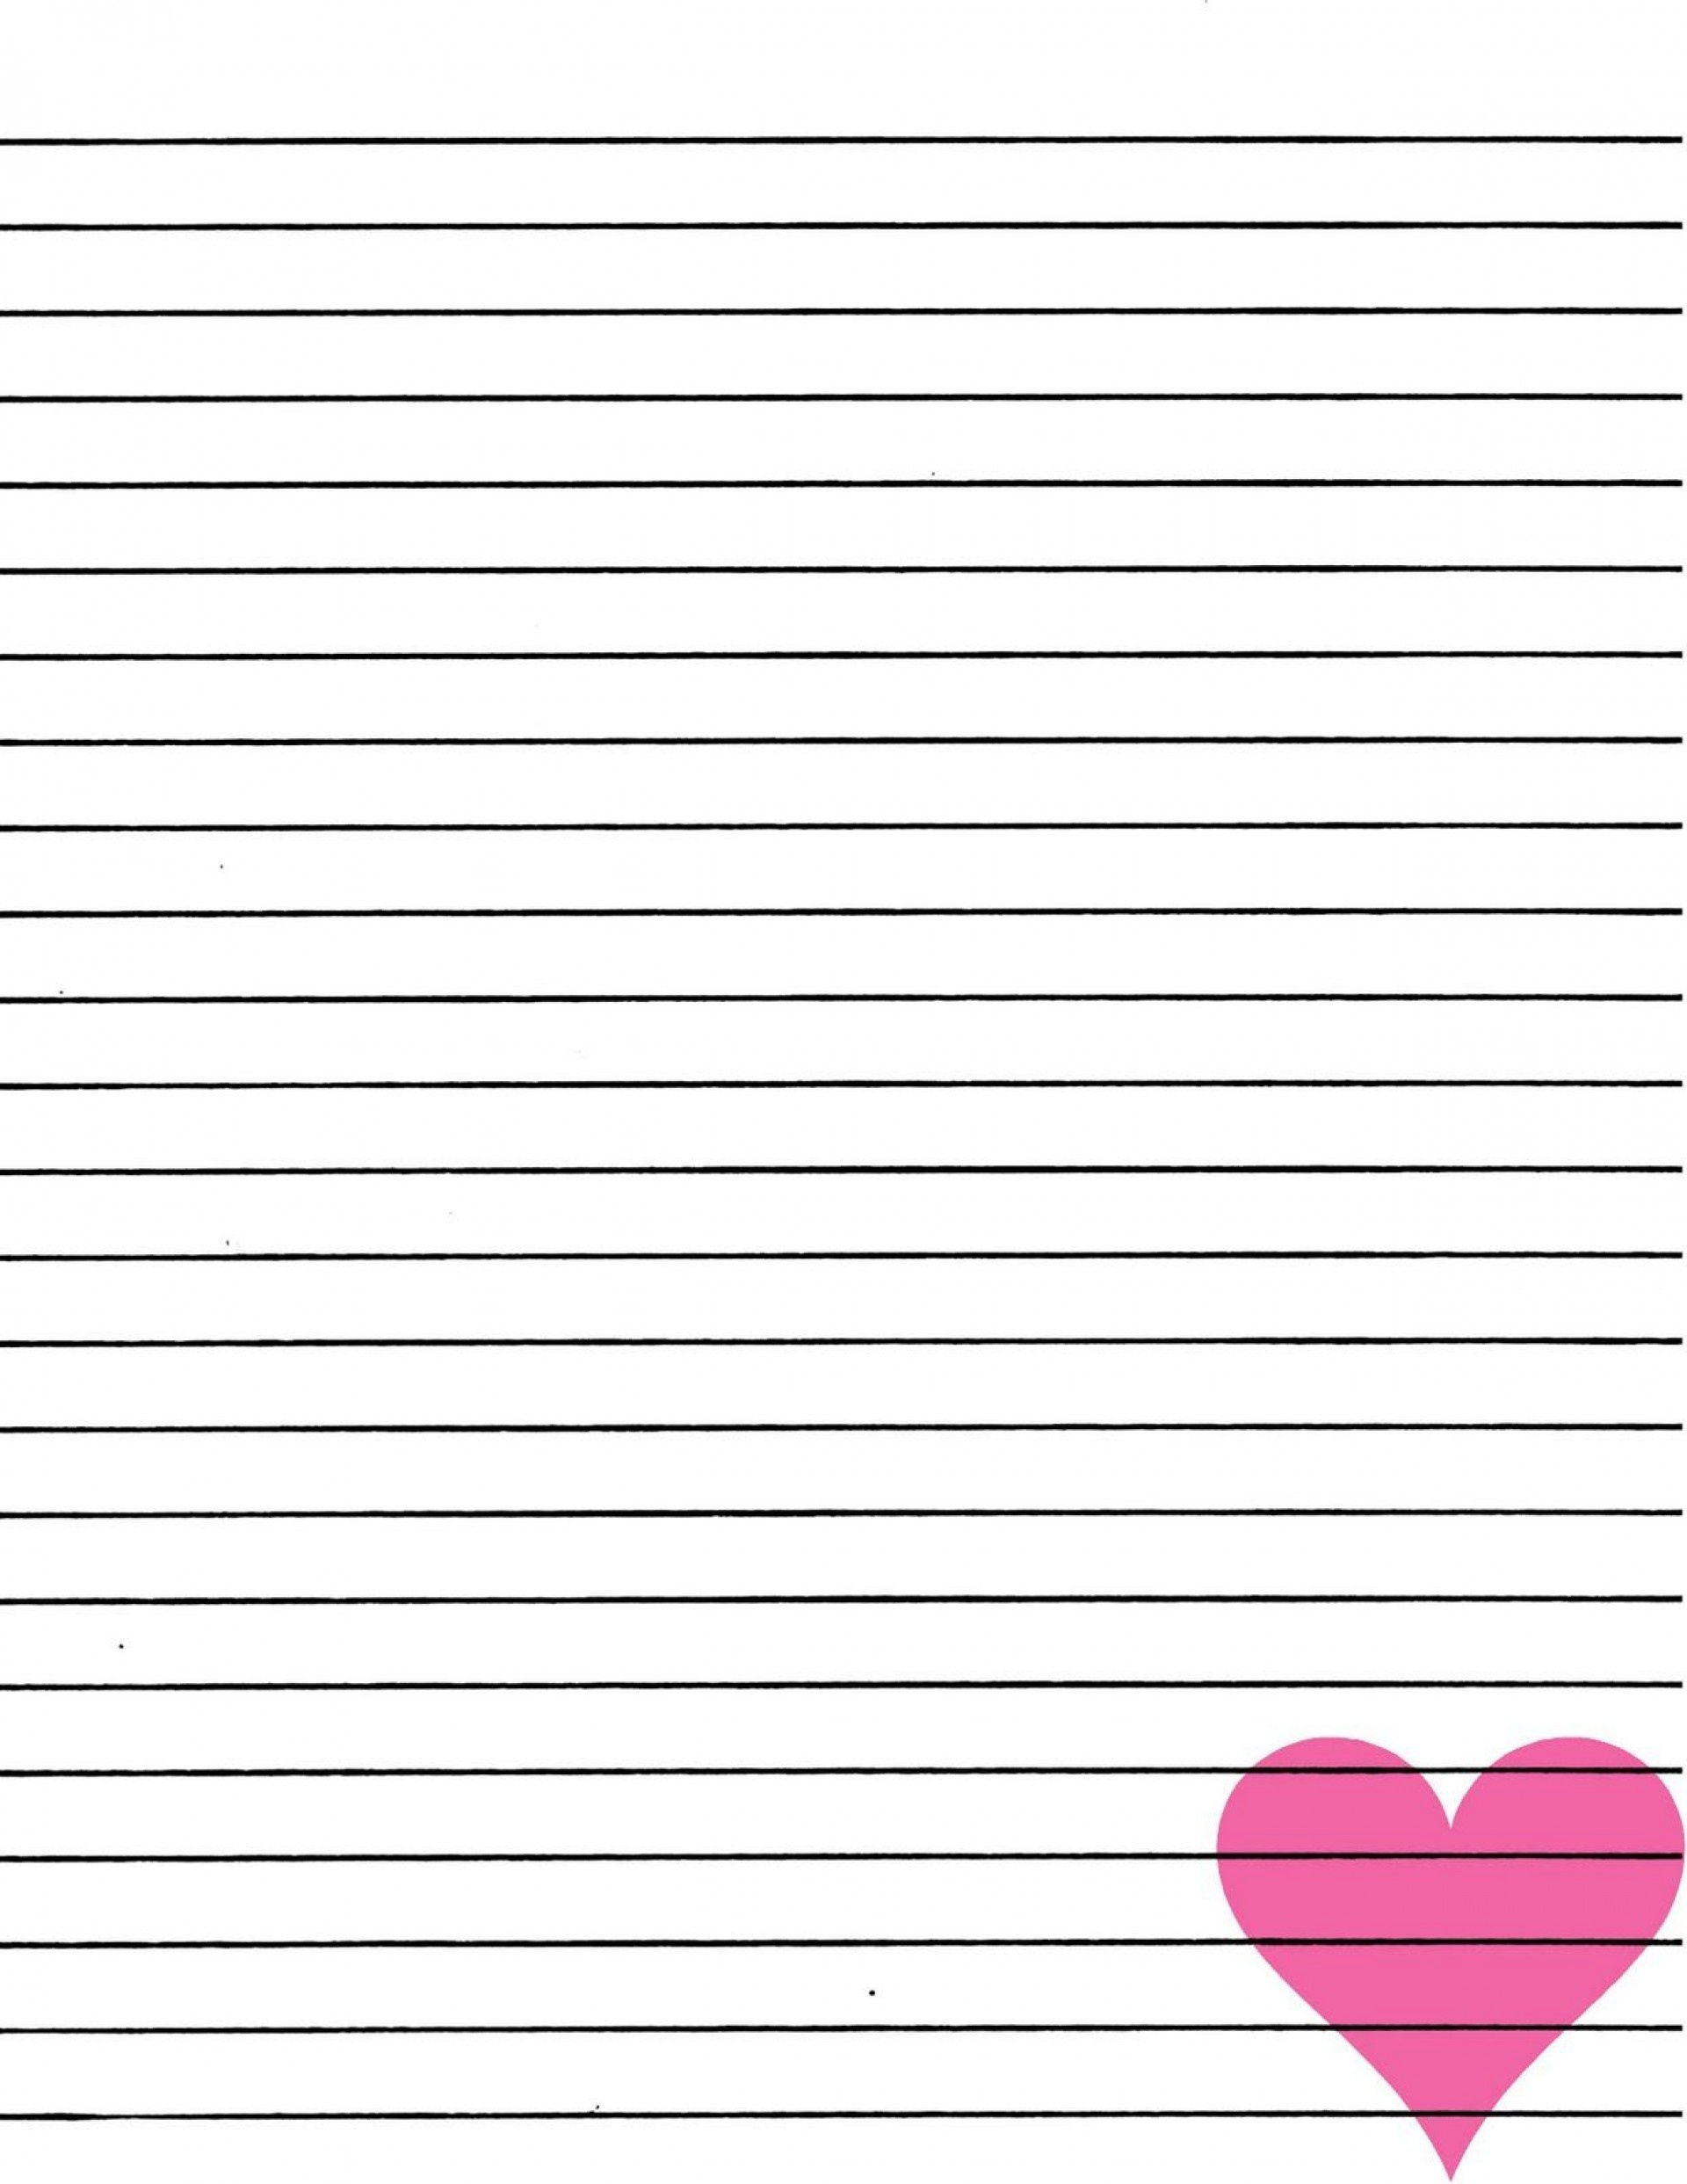 Free Printable Lined Stationery Templates